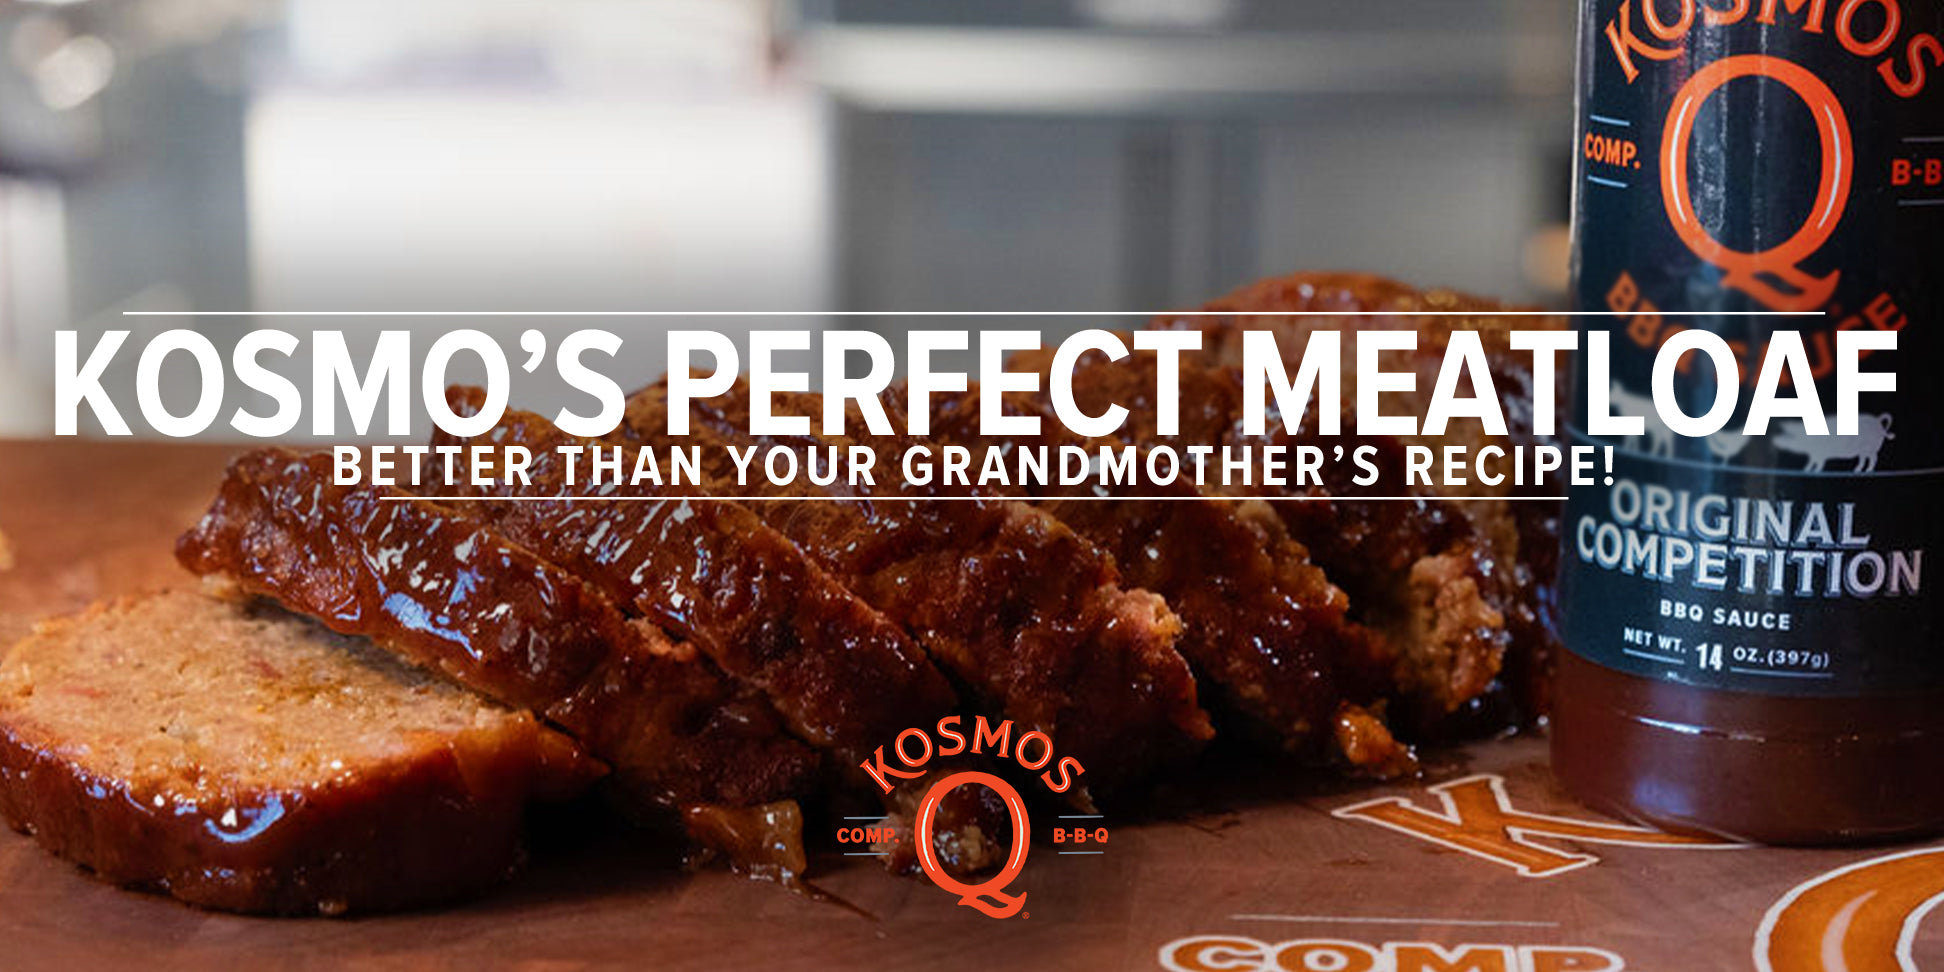 Kosmo's Perfect Meatloaf Recipe